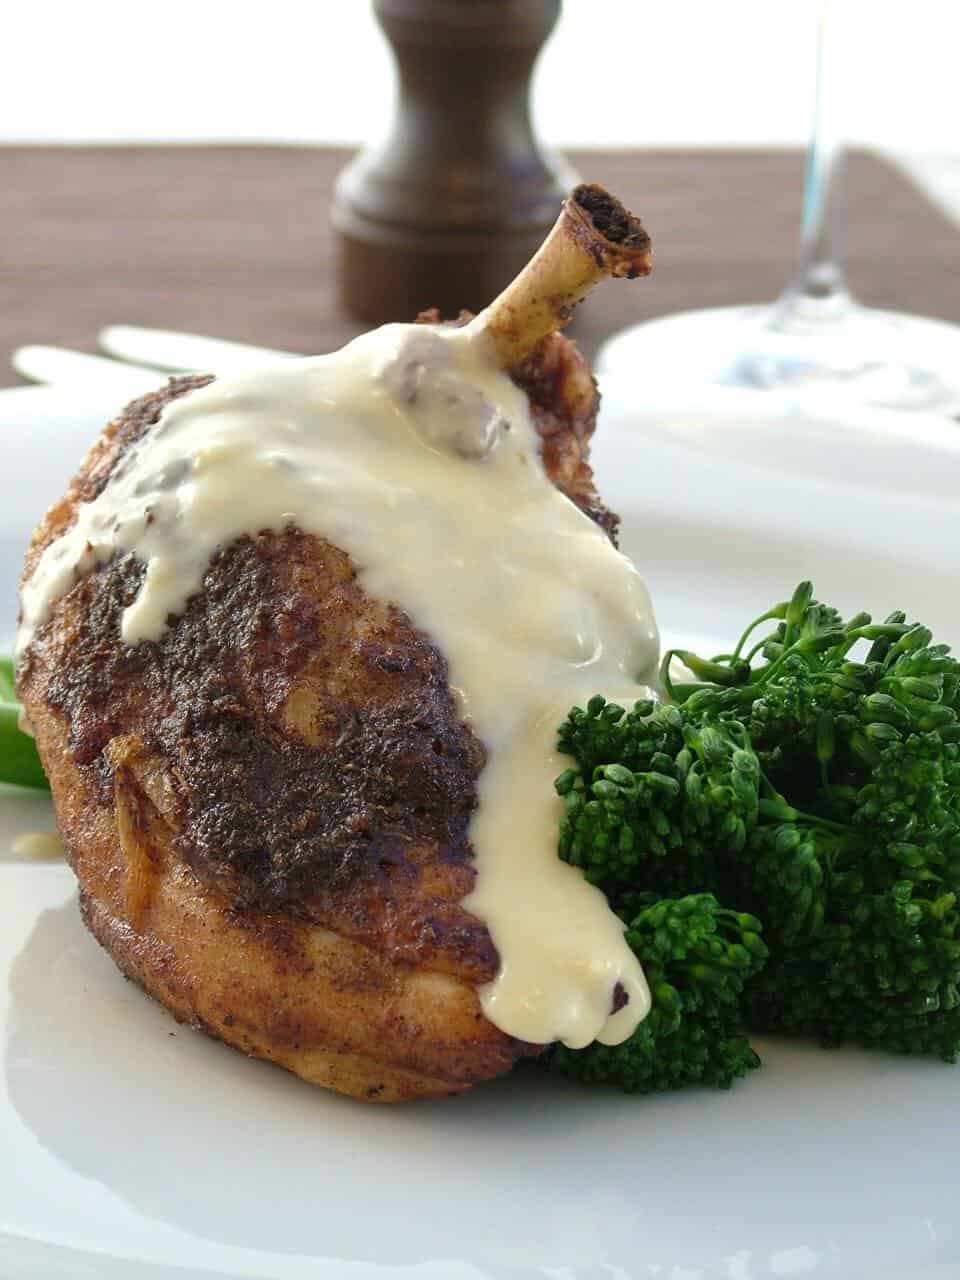 SPICE CRUSTED CHICKEN WITH ORANGE AND GINGER BEURRE BLANC